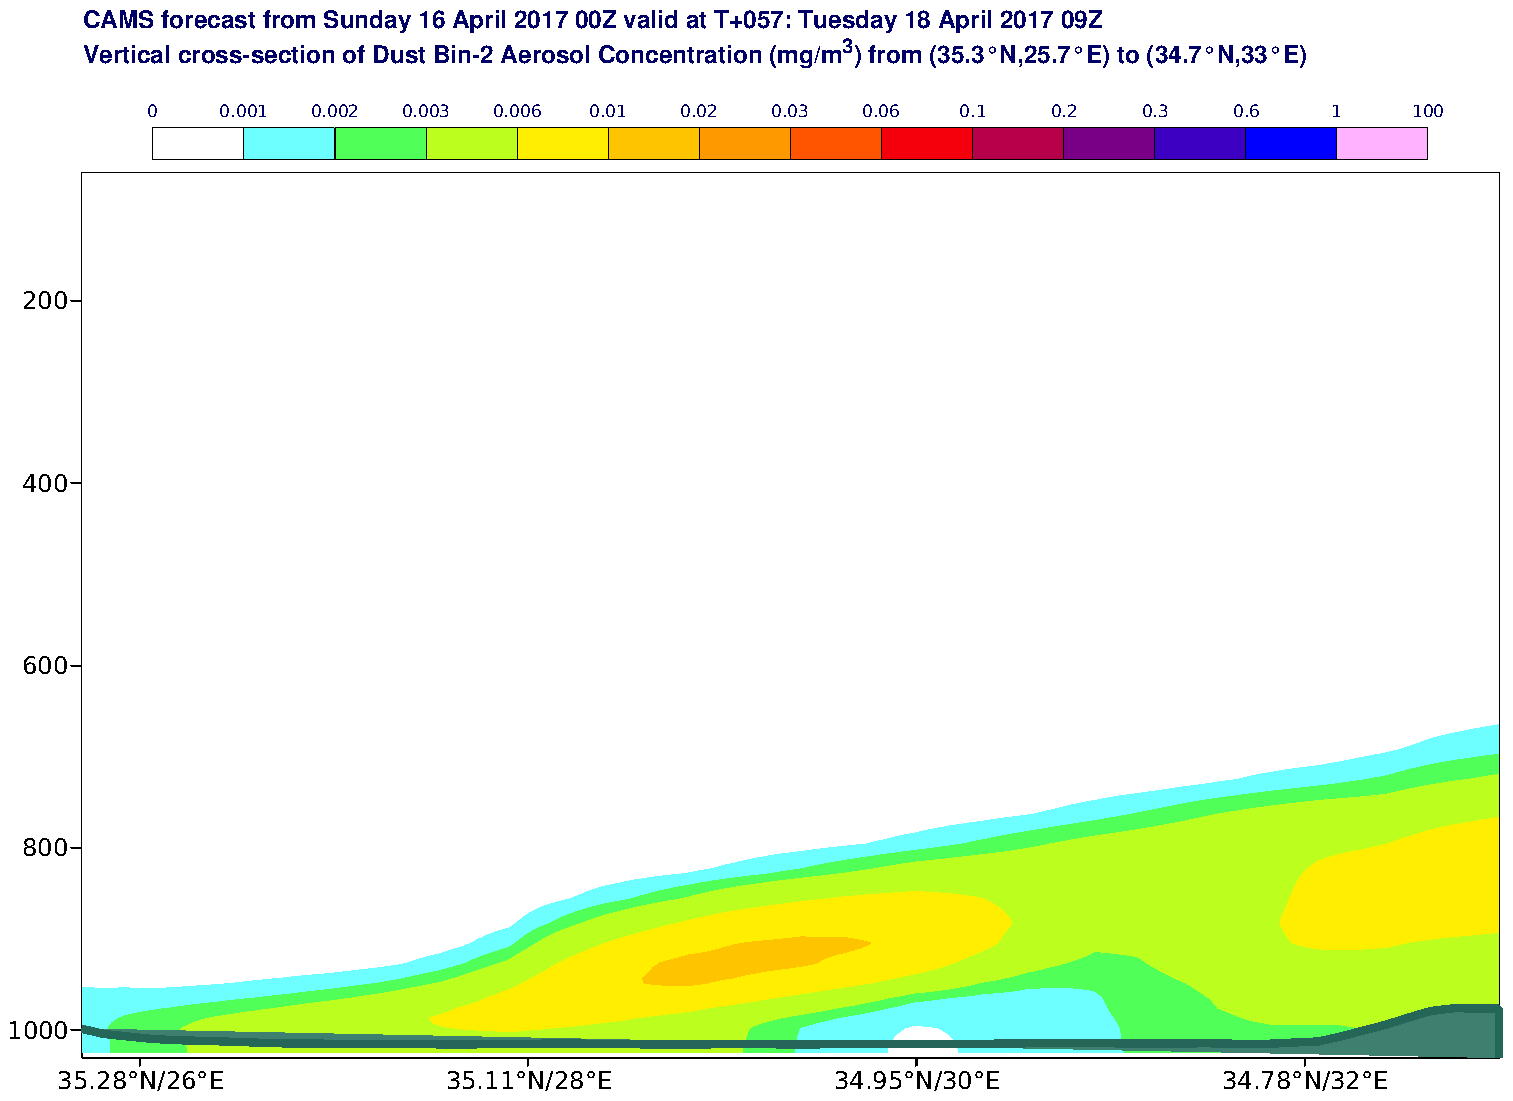 Vertical cross-section of Dust Bin-2 Aerosol Concentration (mg/m3) valid at T57 - 2017-04-18 09:00